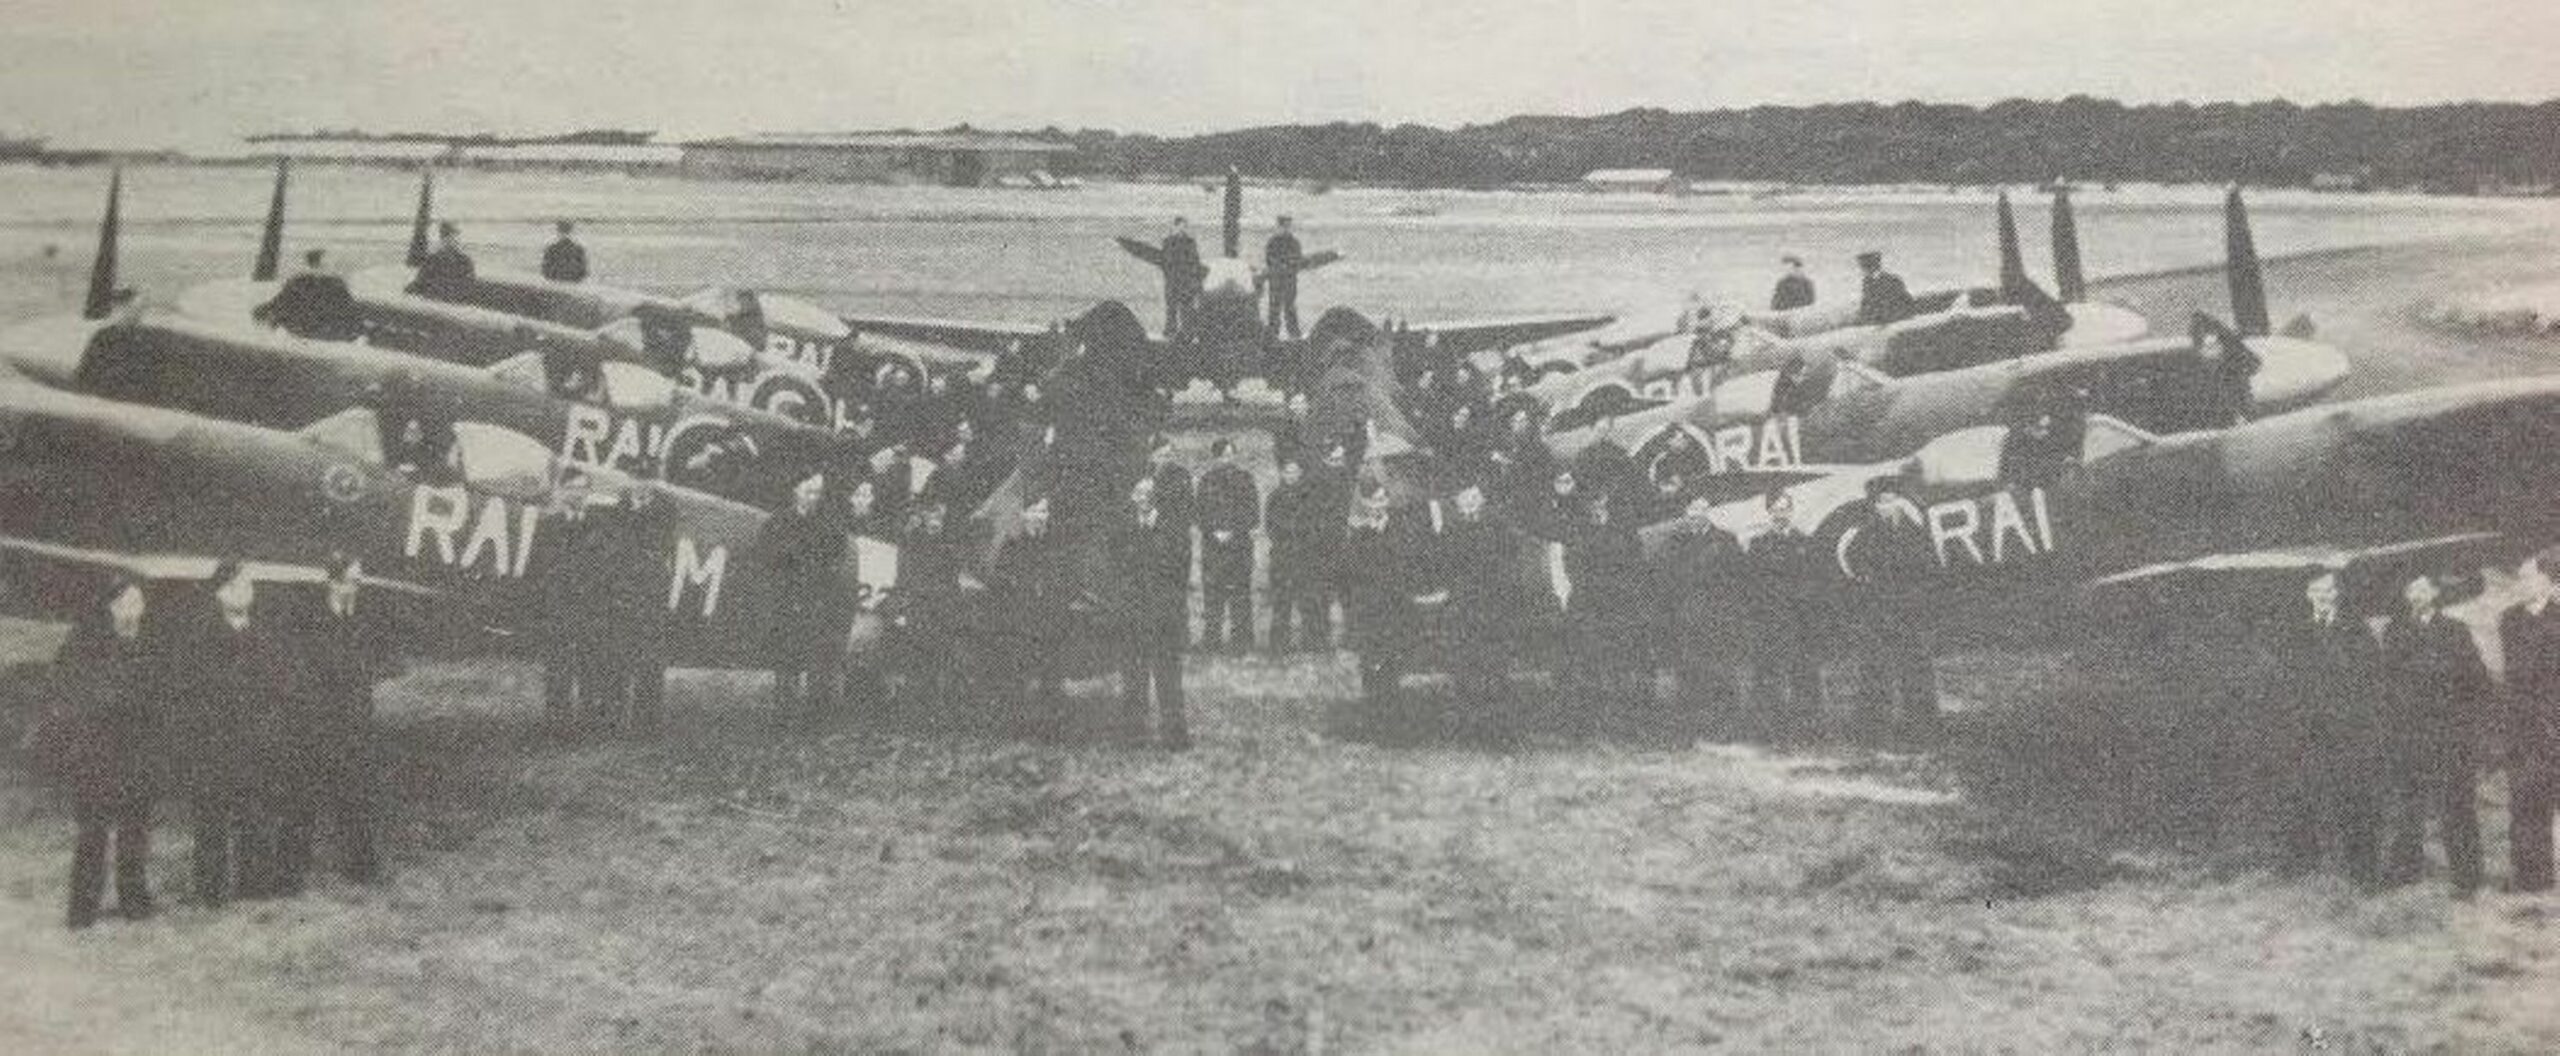 The Spitfires of 602 Squadron at RAF Woodvale near Southport in World War II